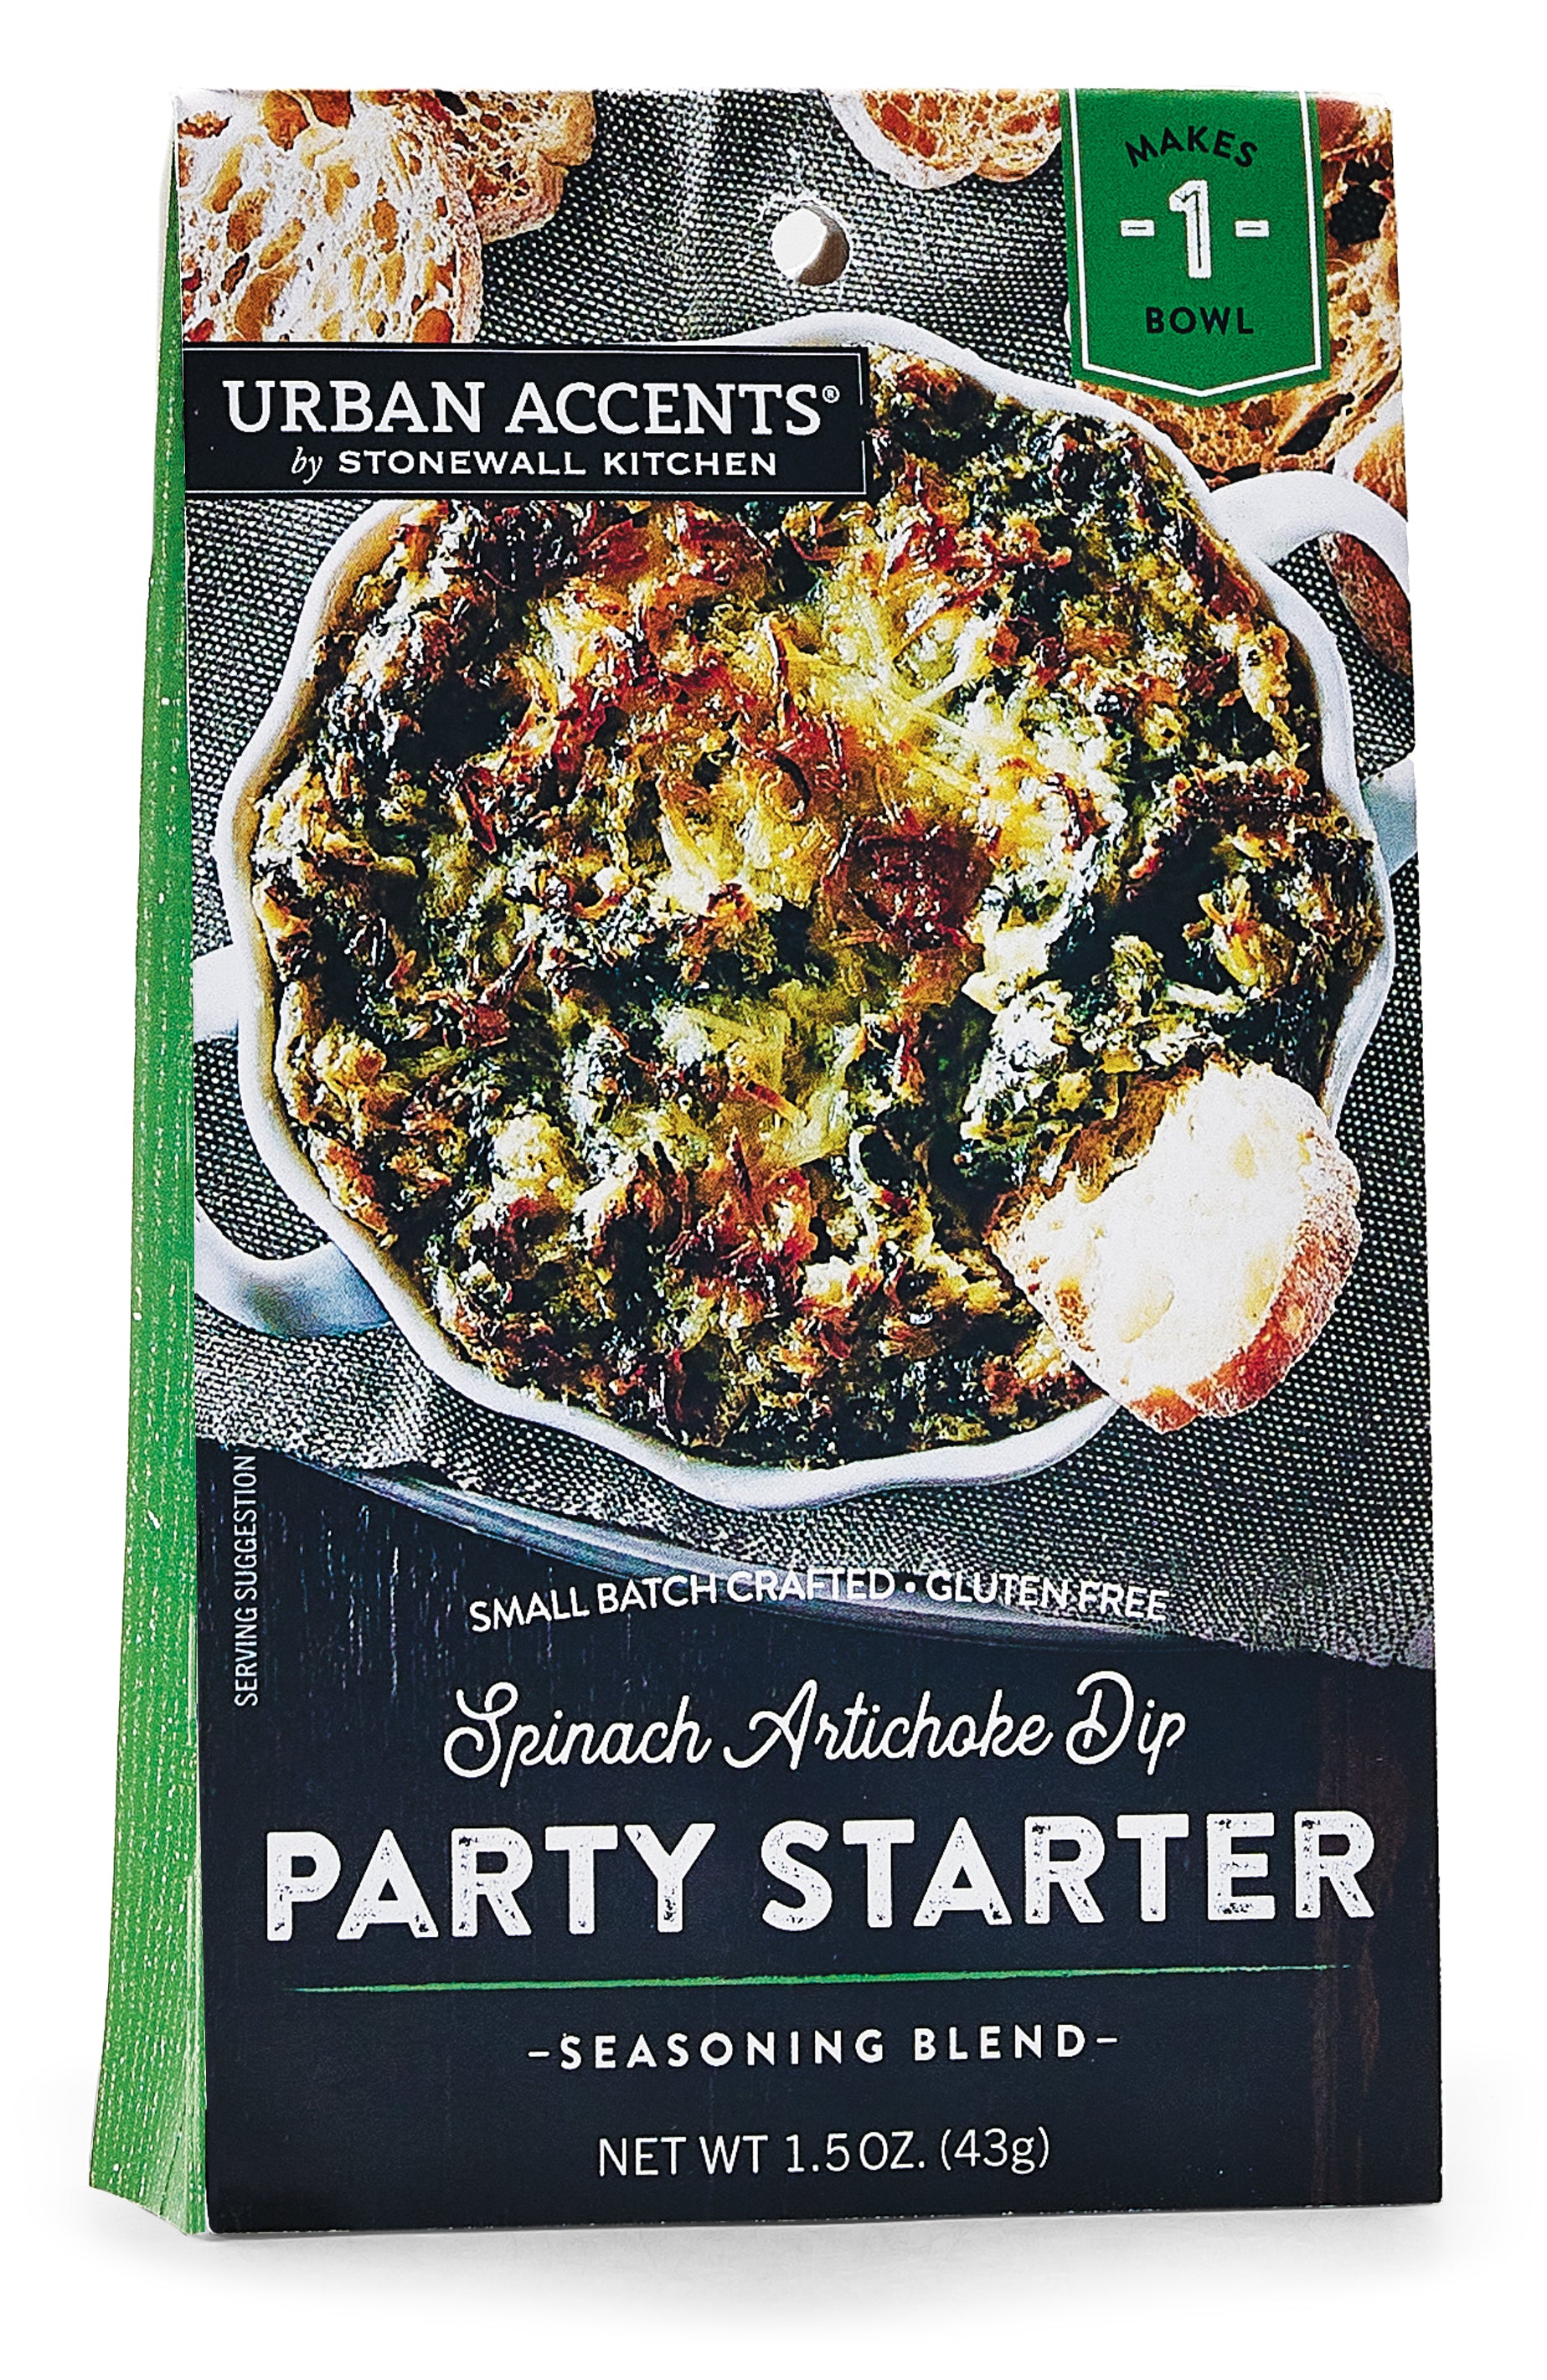 Urban Accents by Stonewall Kitchen Spinach Artichoke Dip Party Starter - Olive Oil Etcetera